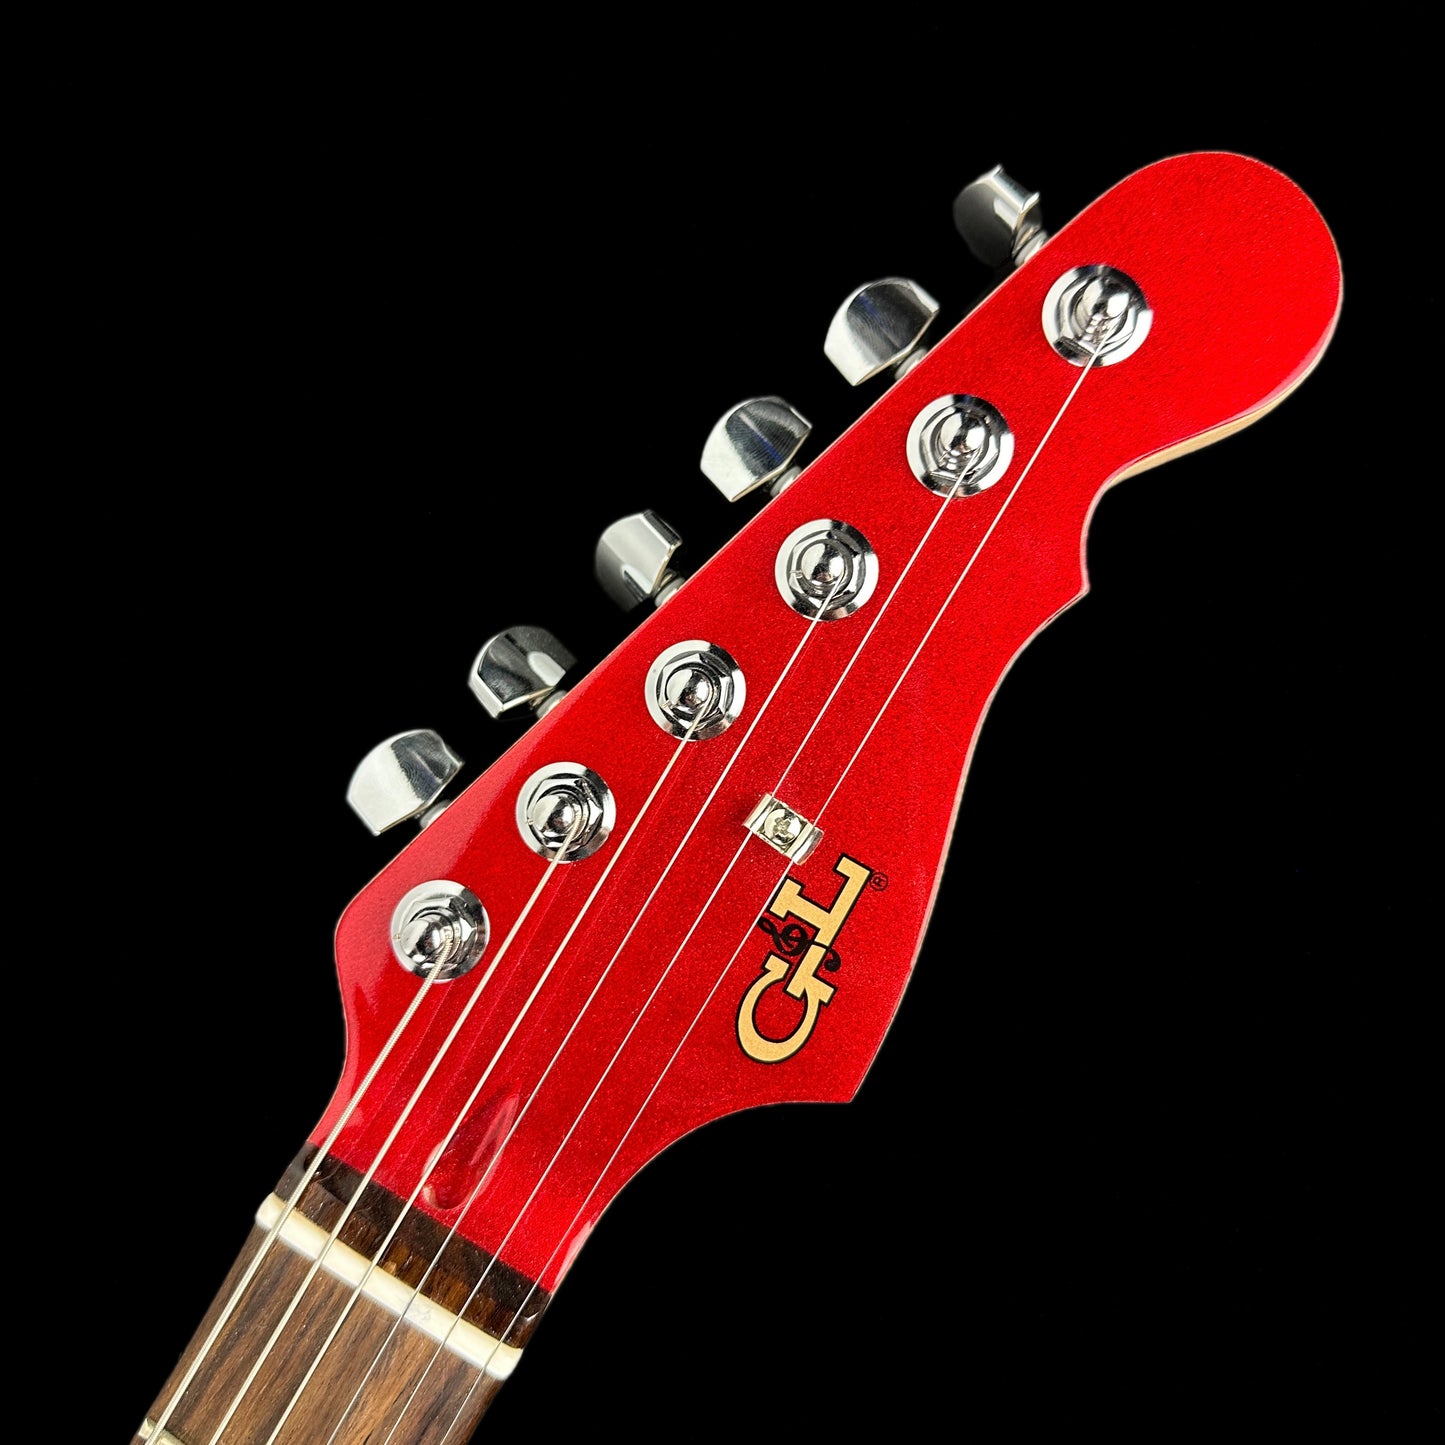 Headstock of G&L USA Legacy HH RMC Empress Candy Apple Red Metallic Matching Headstock.